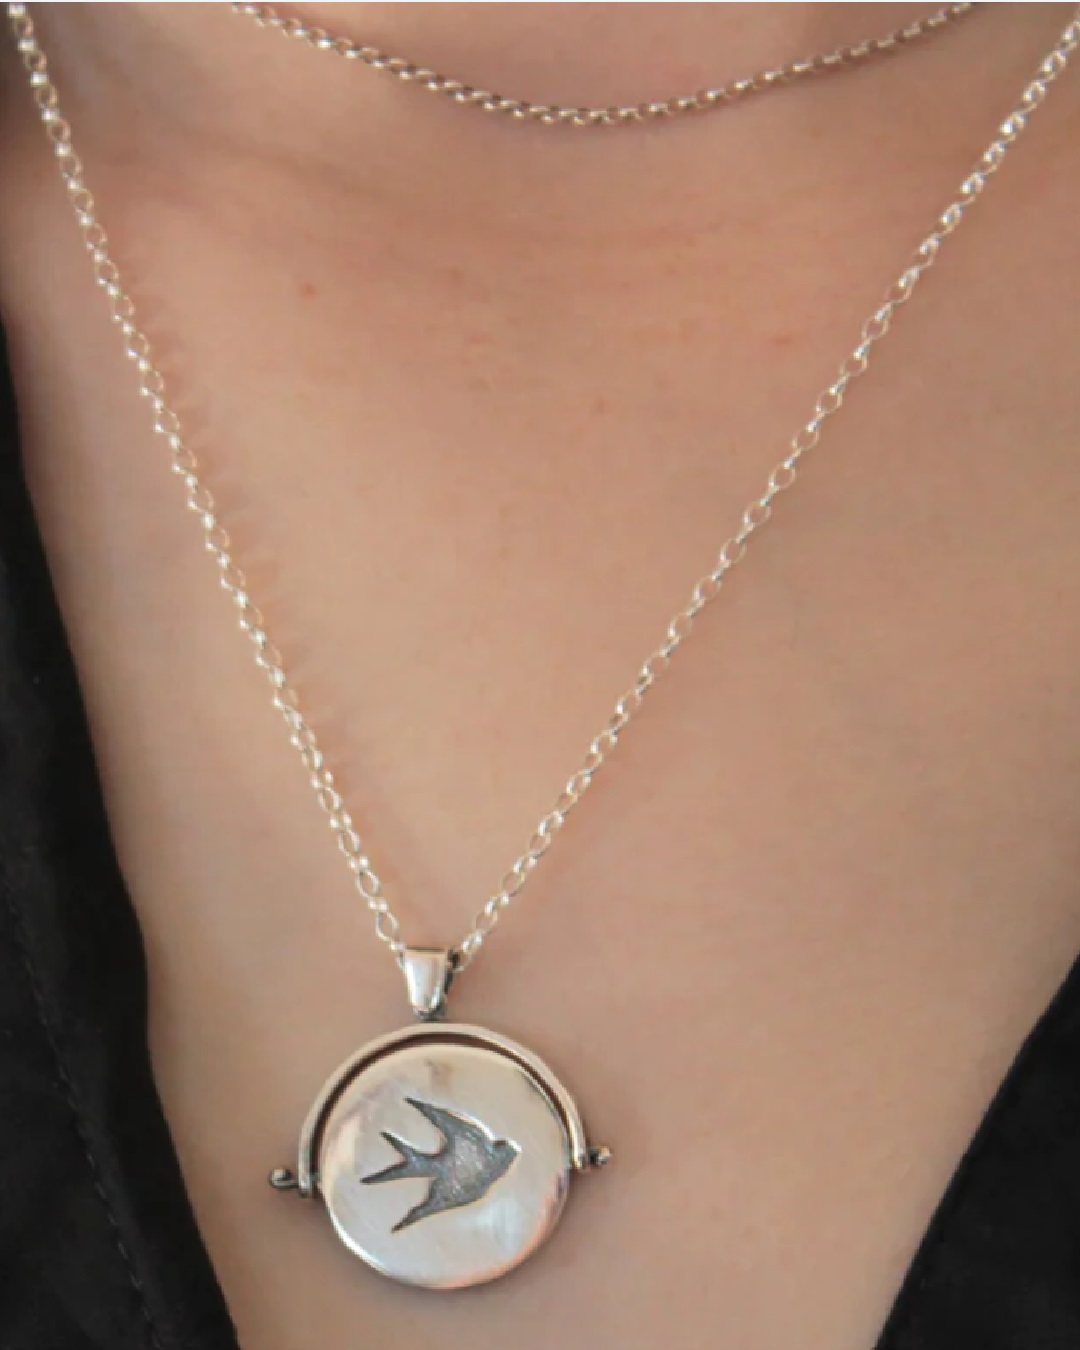 Silver flip circle pendant necklace with a bird on persons neck